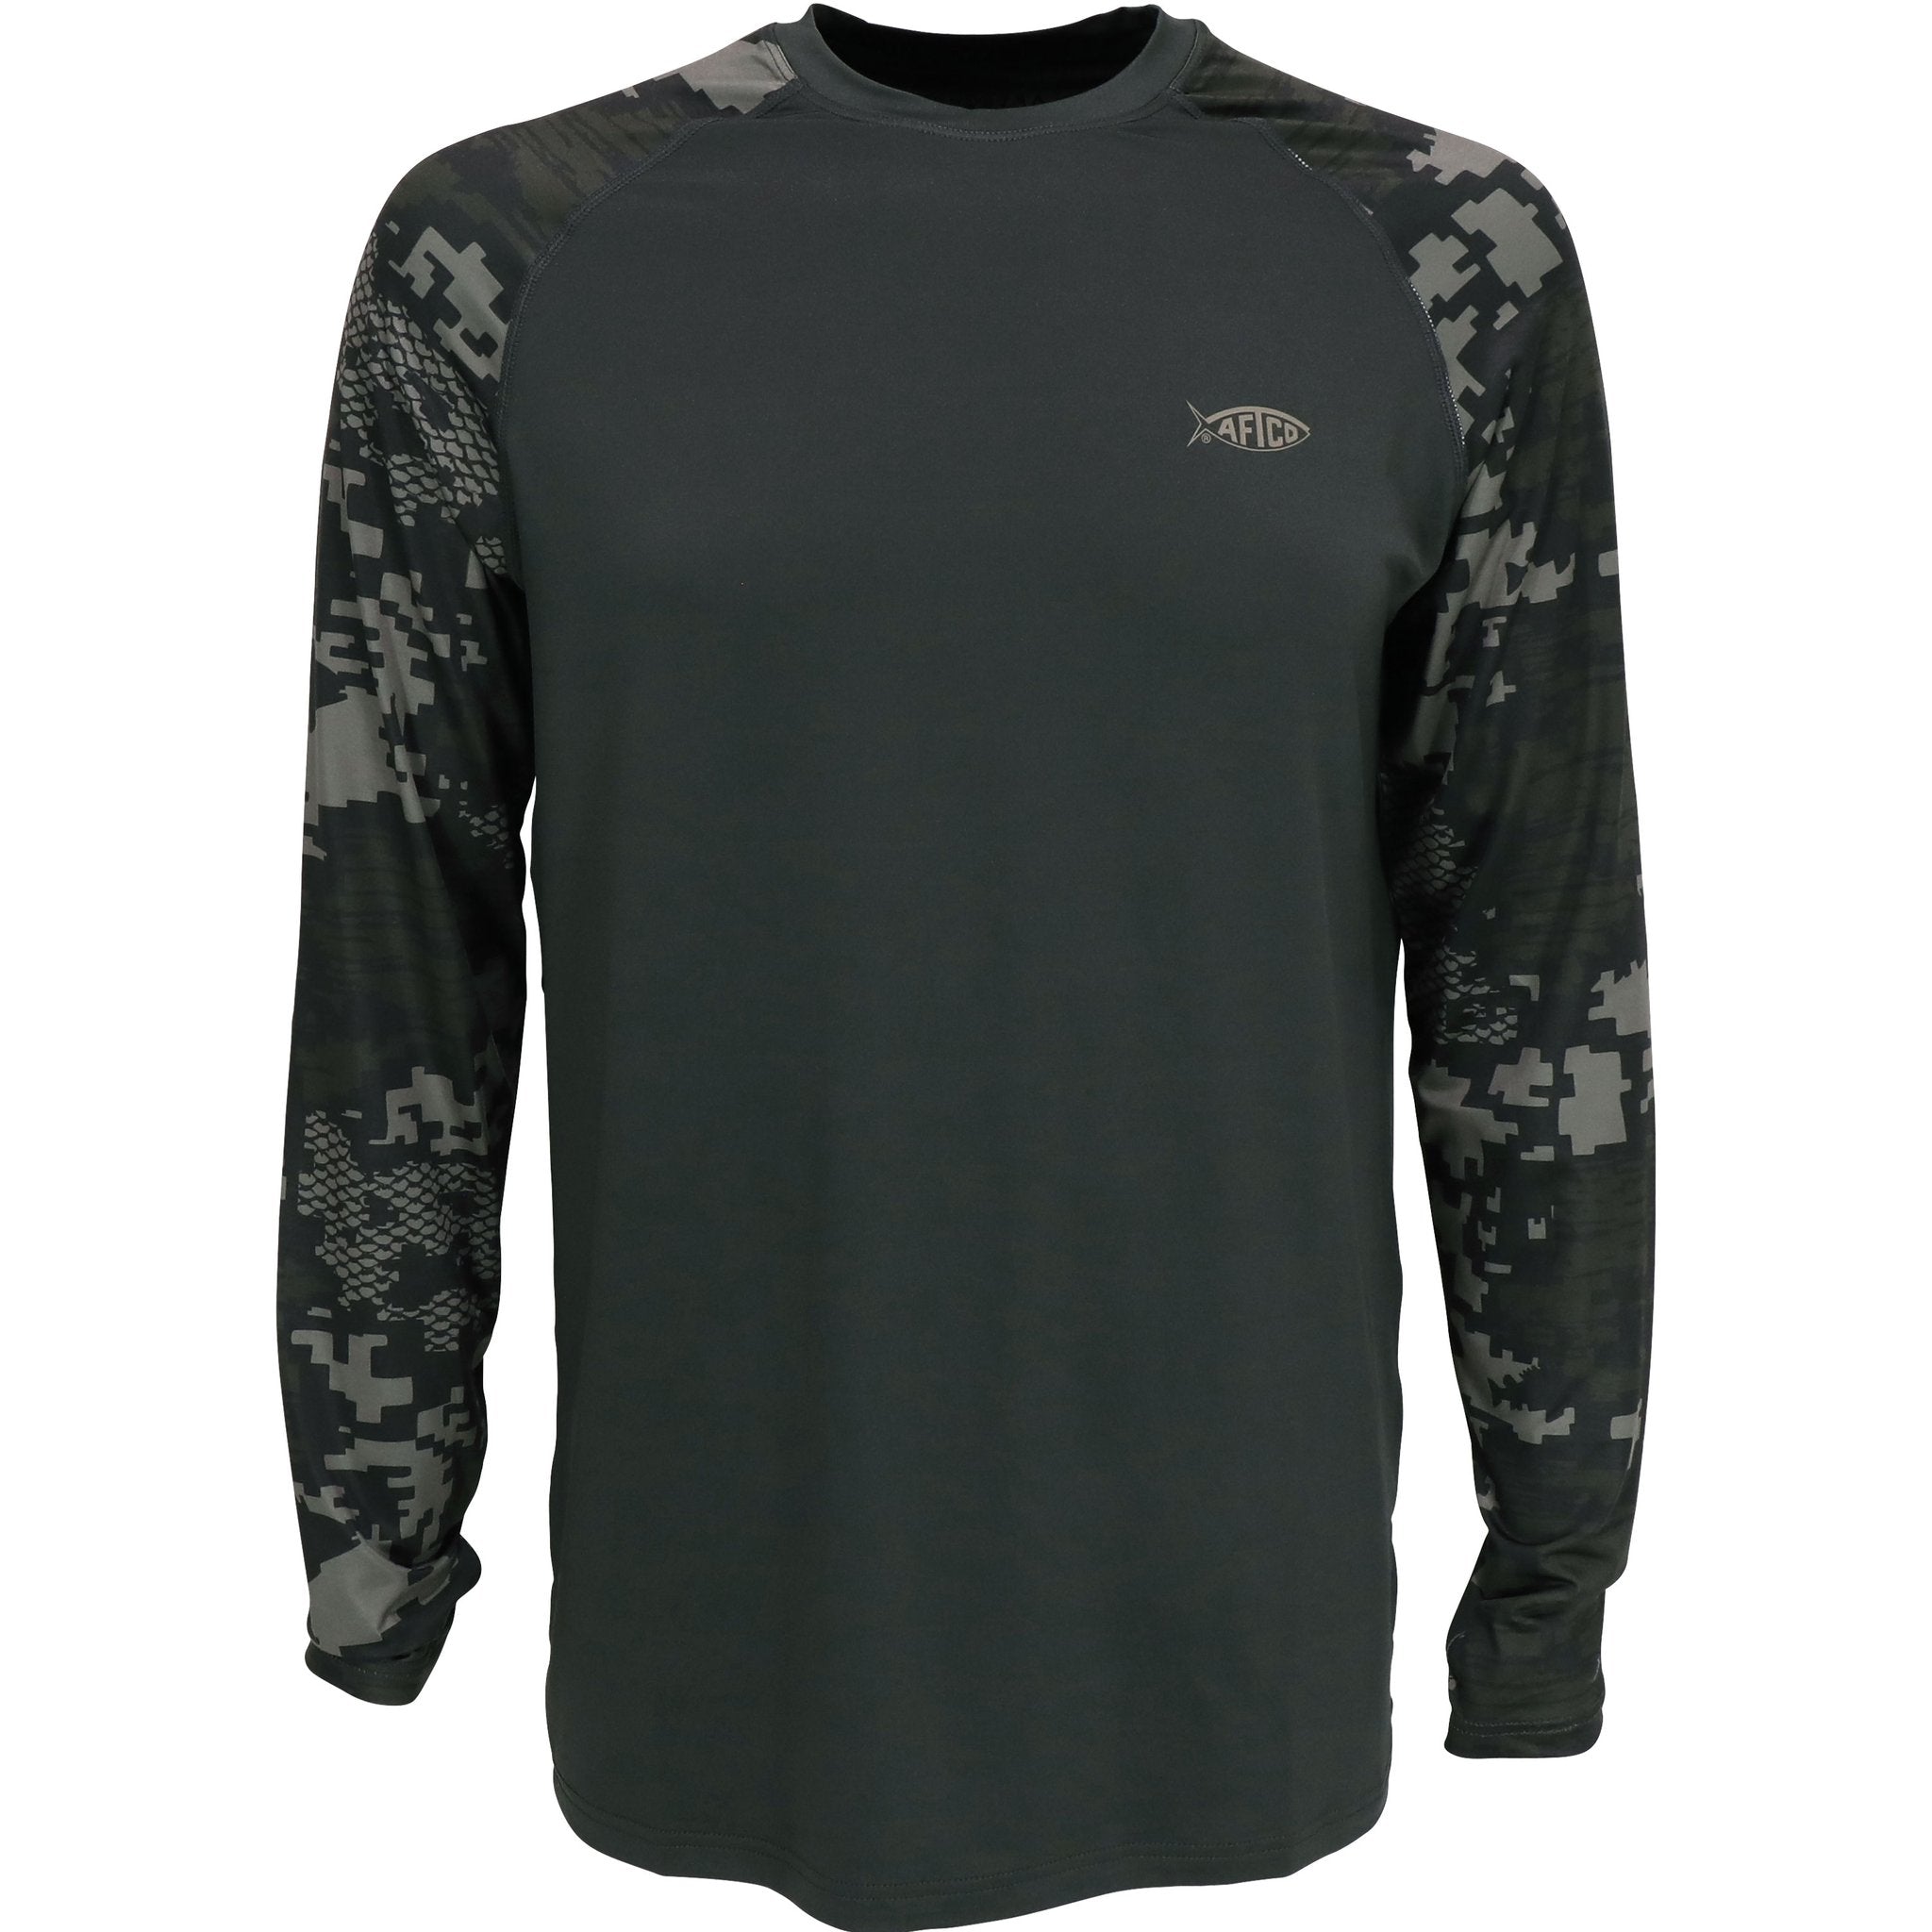 AFTCO Long Sleeve Fishing Shirts & Tops for sale